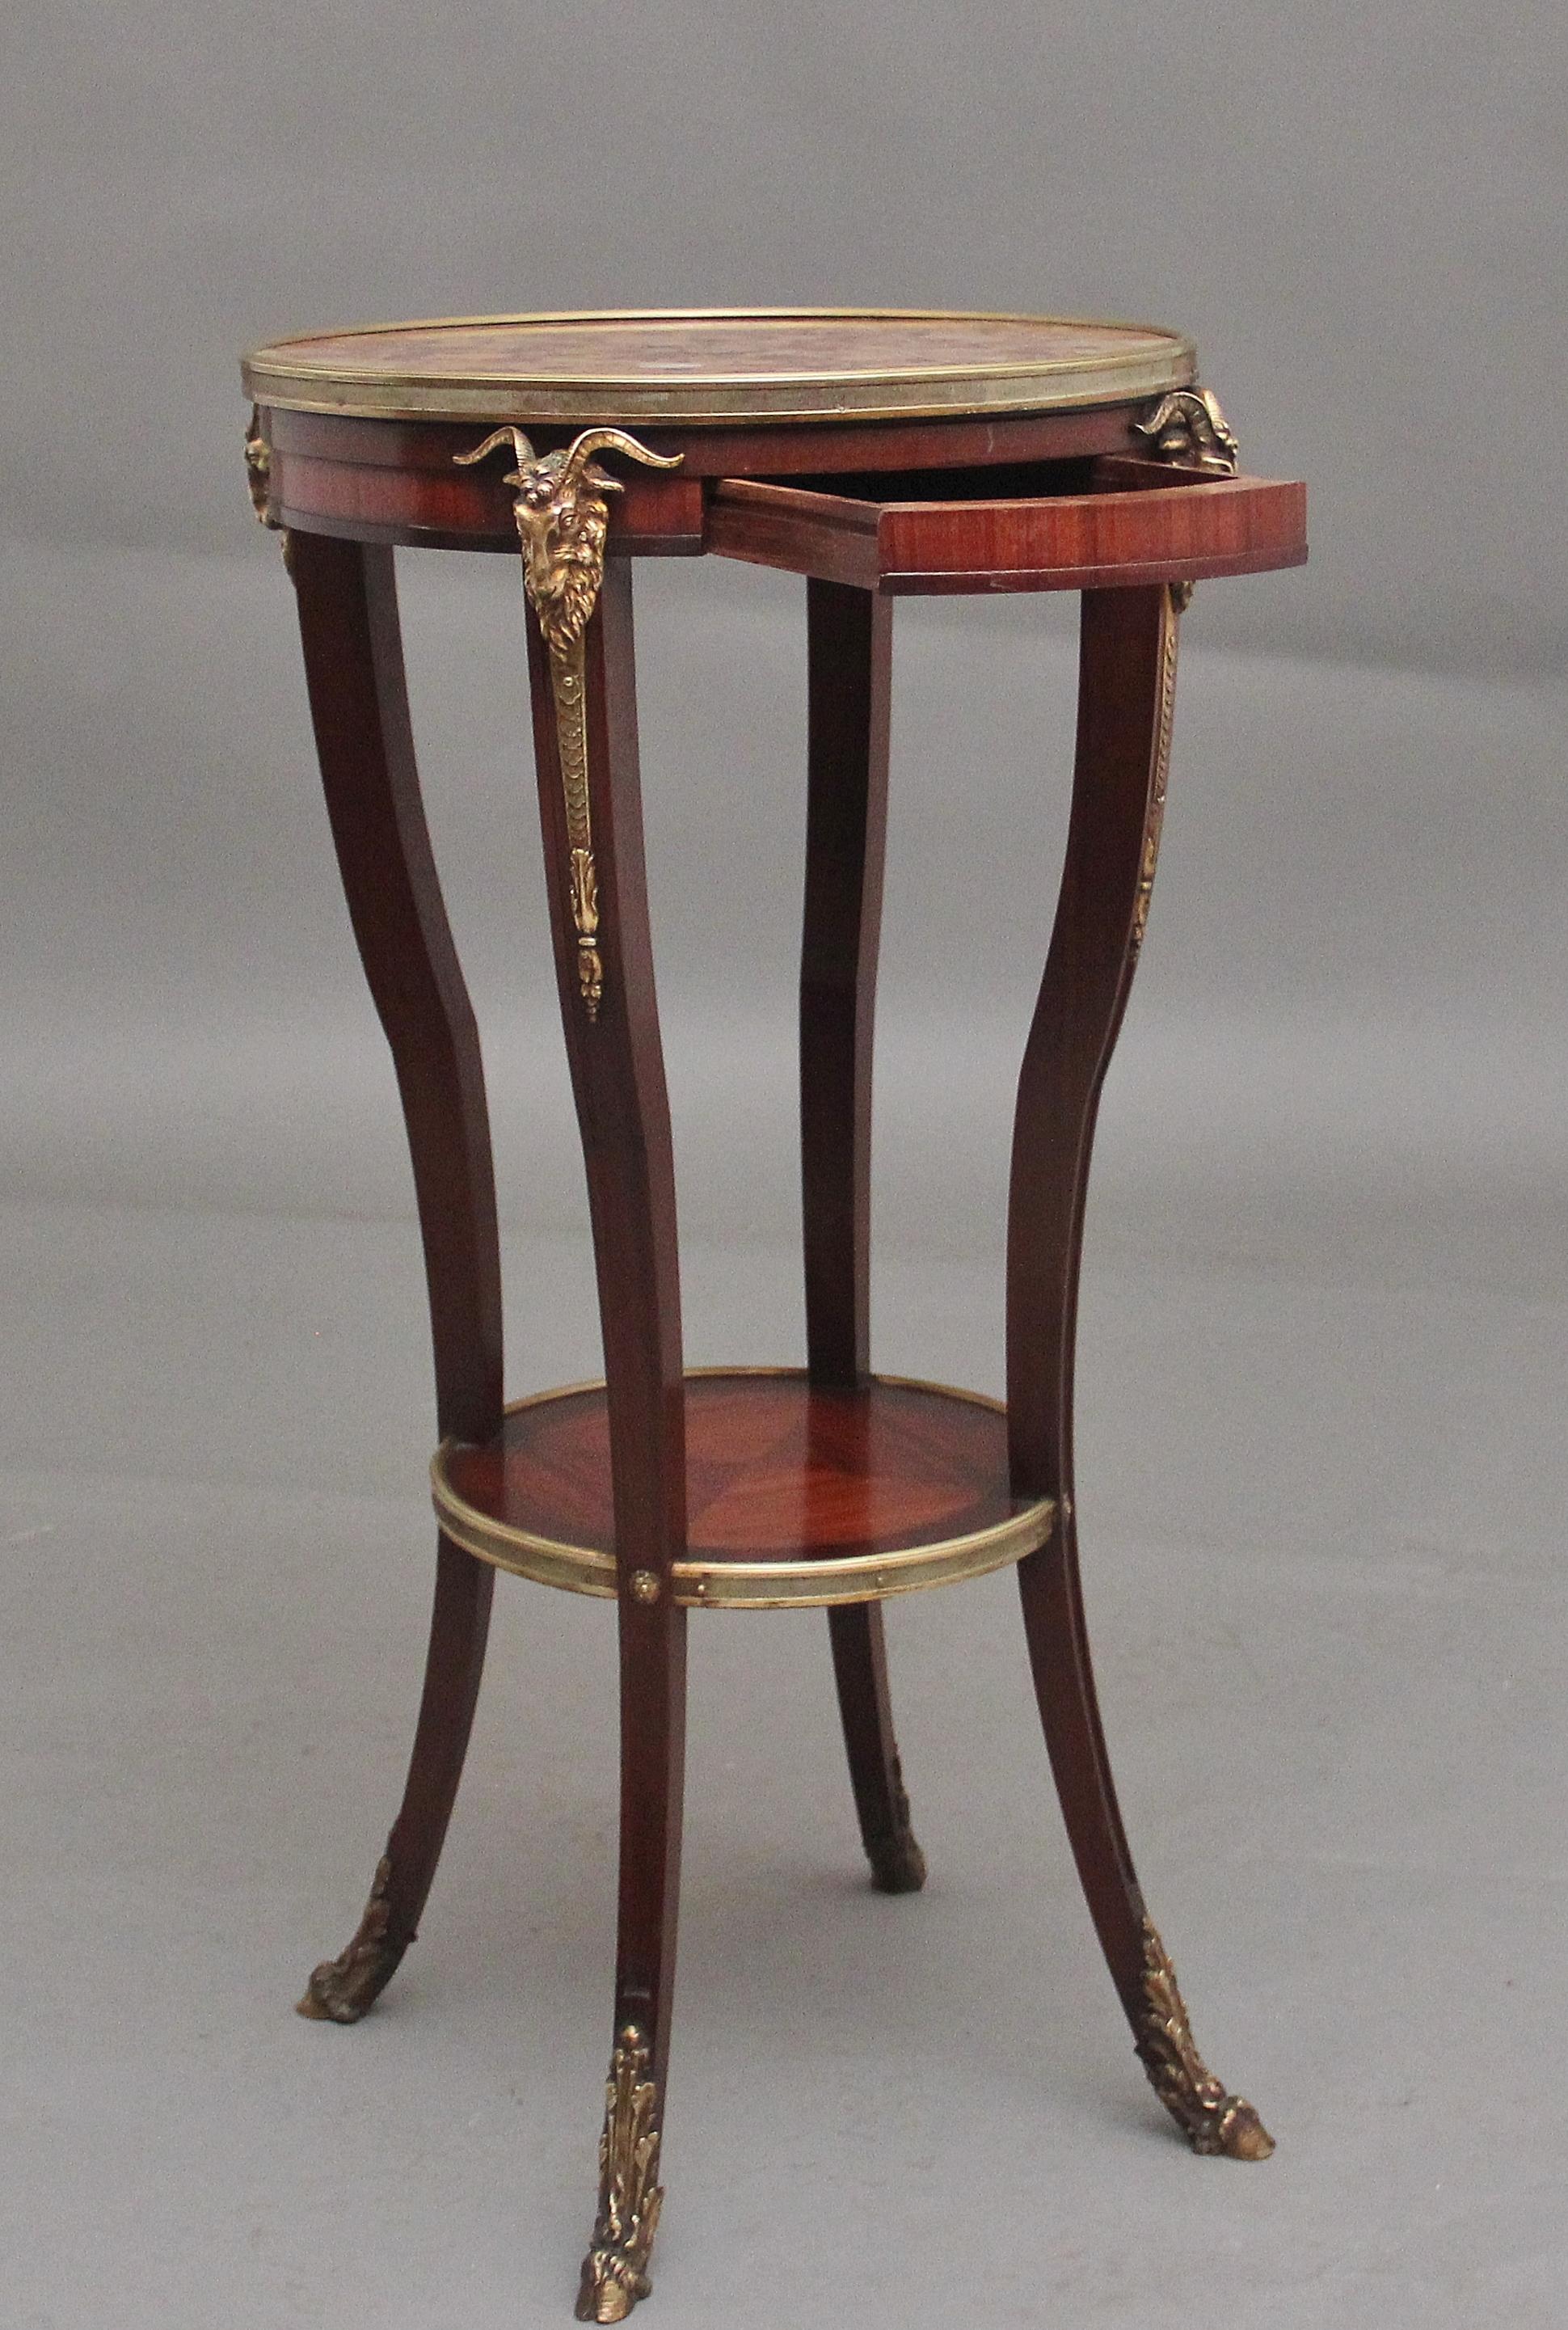 19th Century French mahogany and marble top occasional table, the circular speckled rouge marble top having a brass moulded edge, having a single frieze drawer below with four decorative brass rams heads above each support structure leading down to